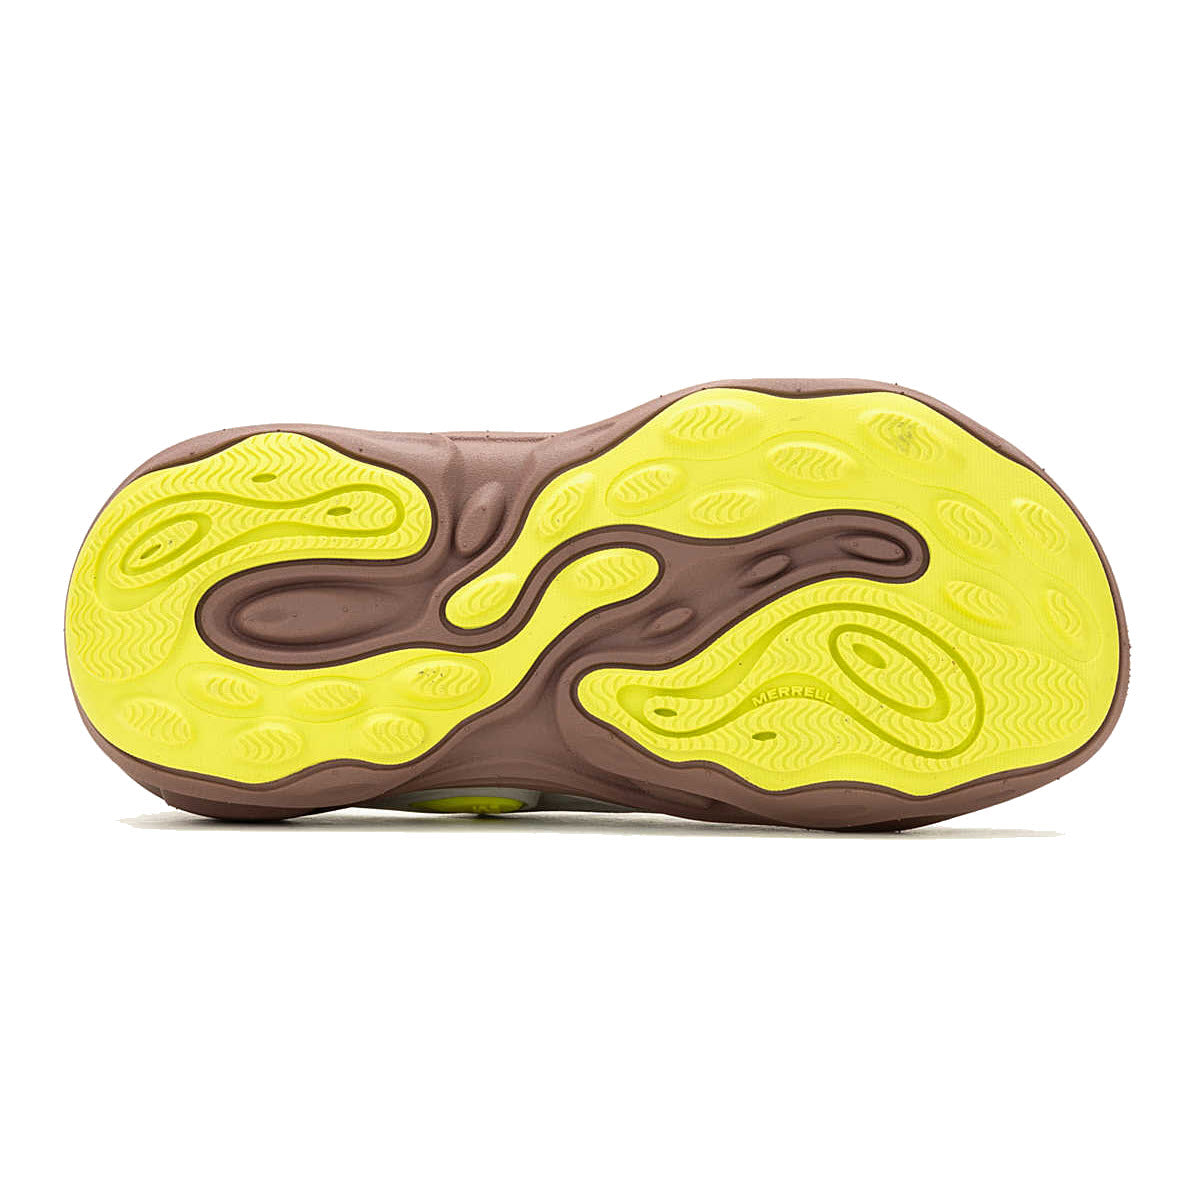 Sole of a Merrell hiking boot with a neon yellow and brown tread pattern on a white background.